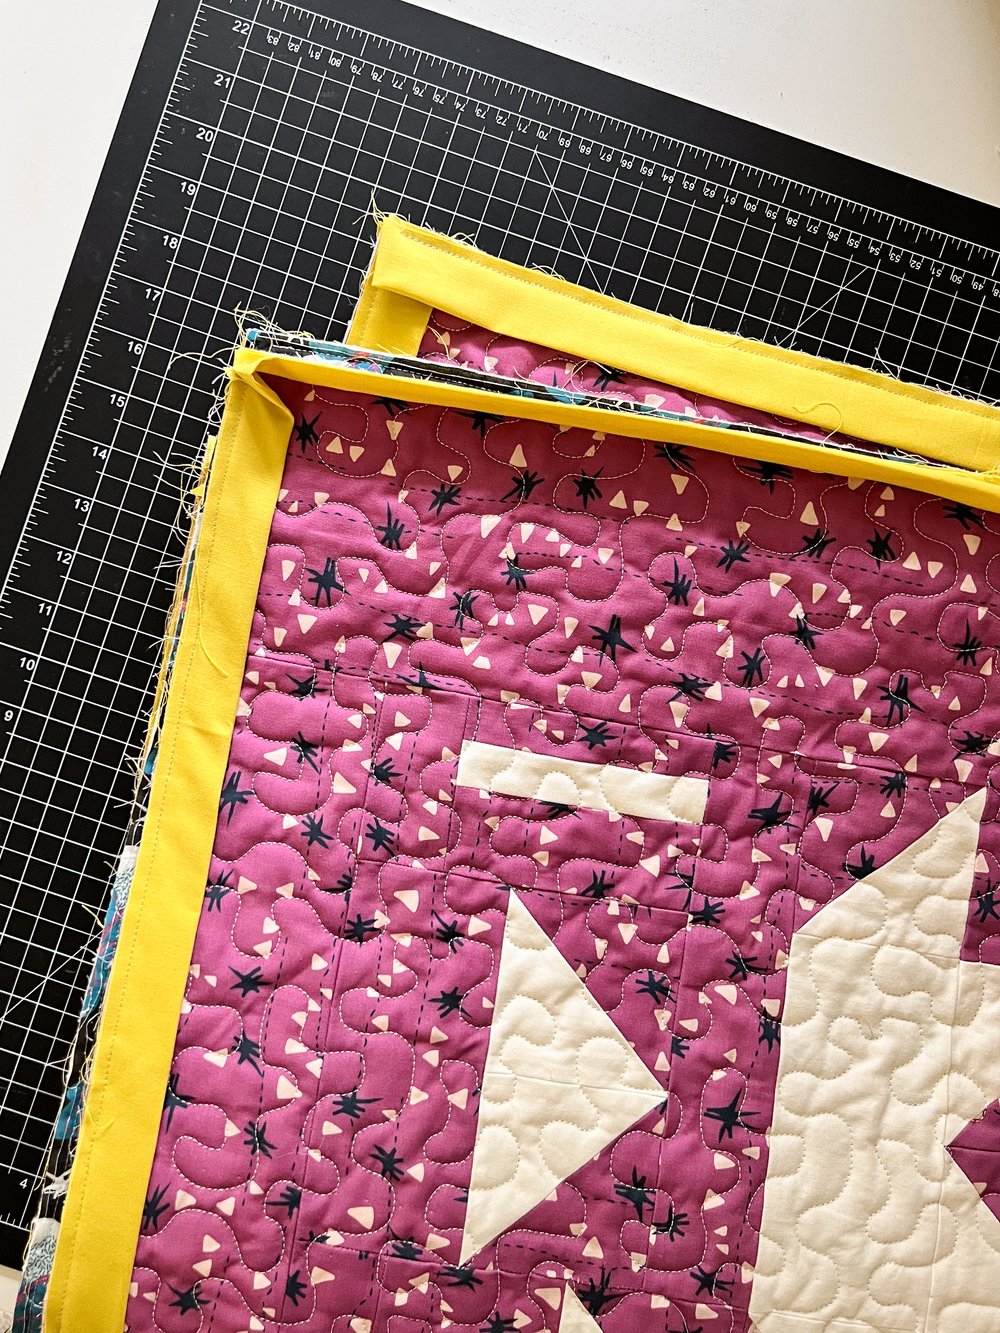 Start a DIY Throw Quilt Project - The Star Sisters' Starry Quilt